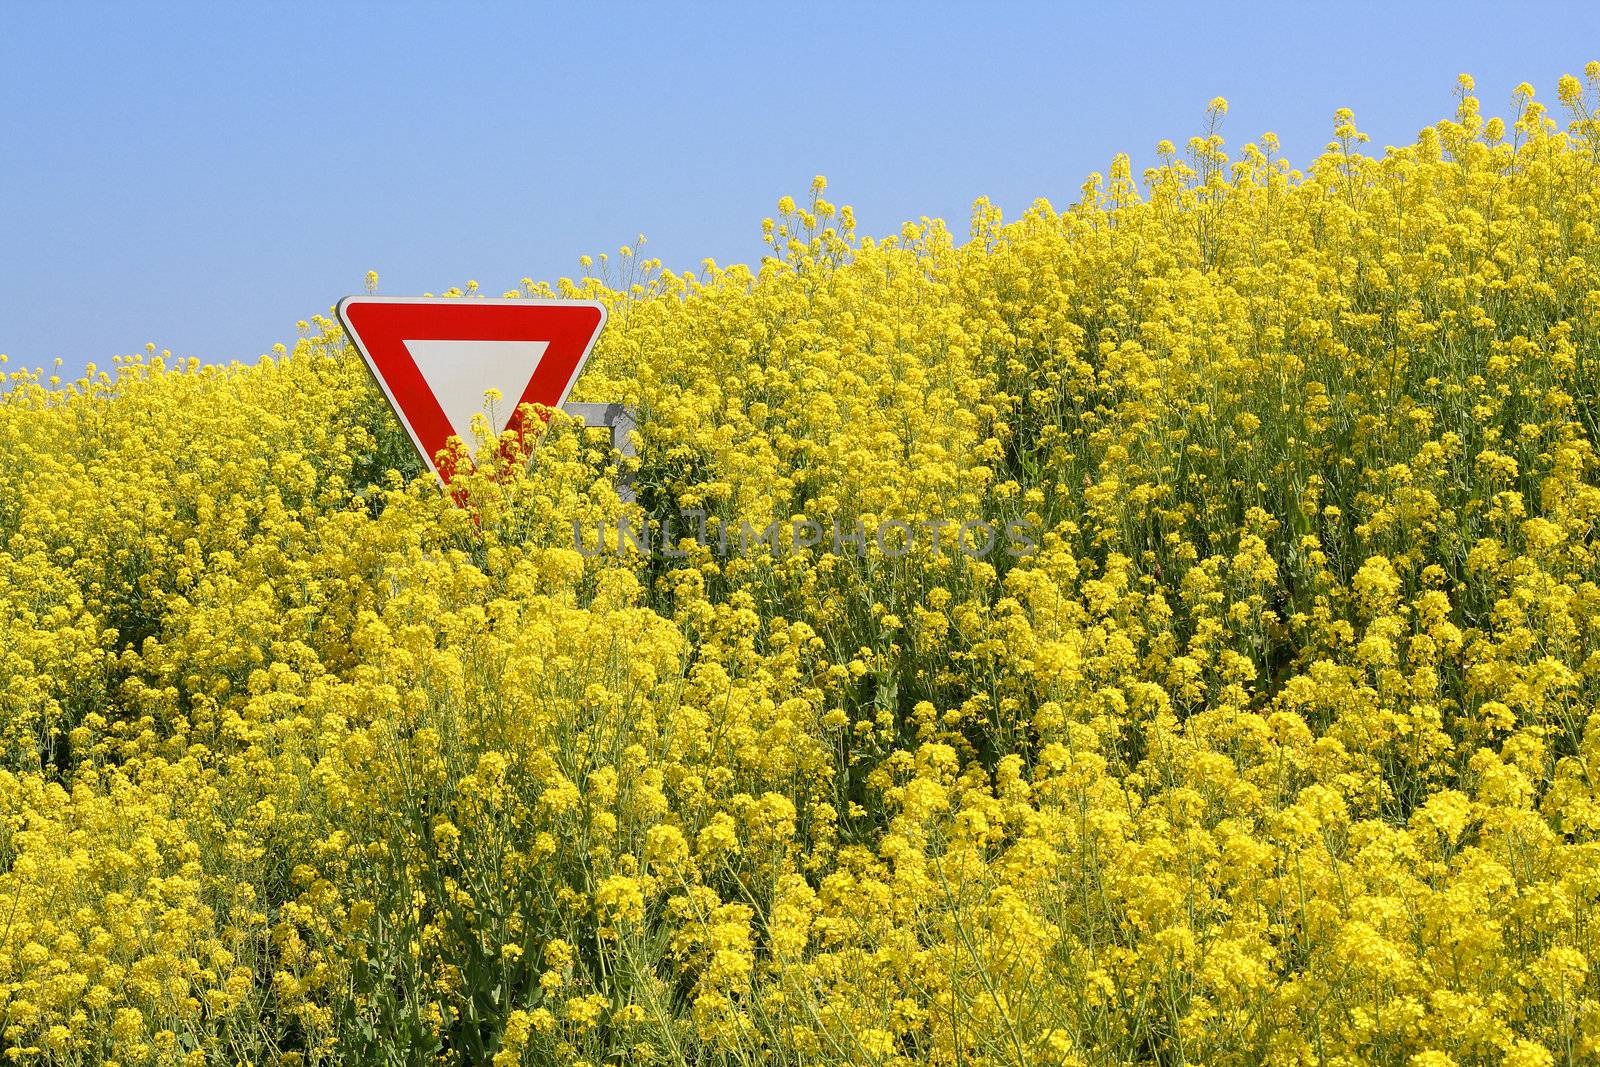 Overflowing rape field in Brittany, immersing a stop sign